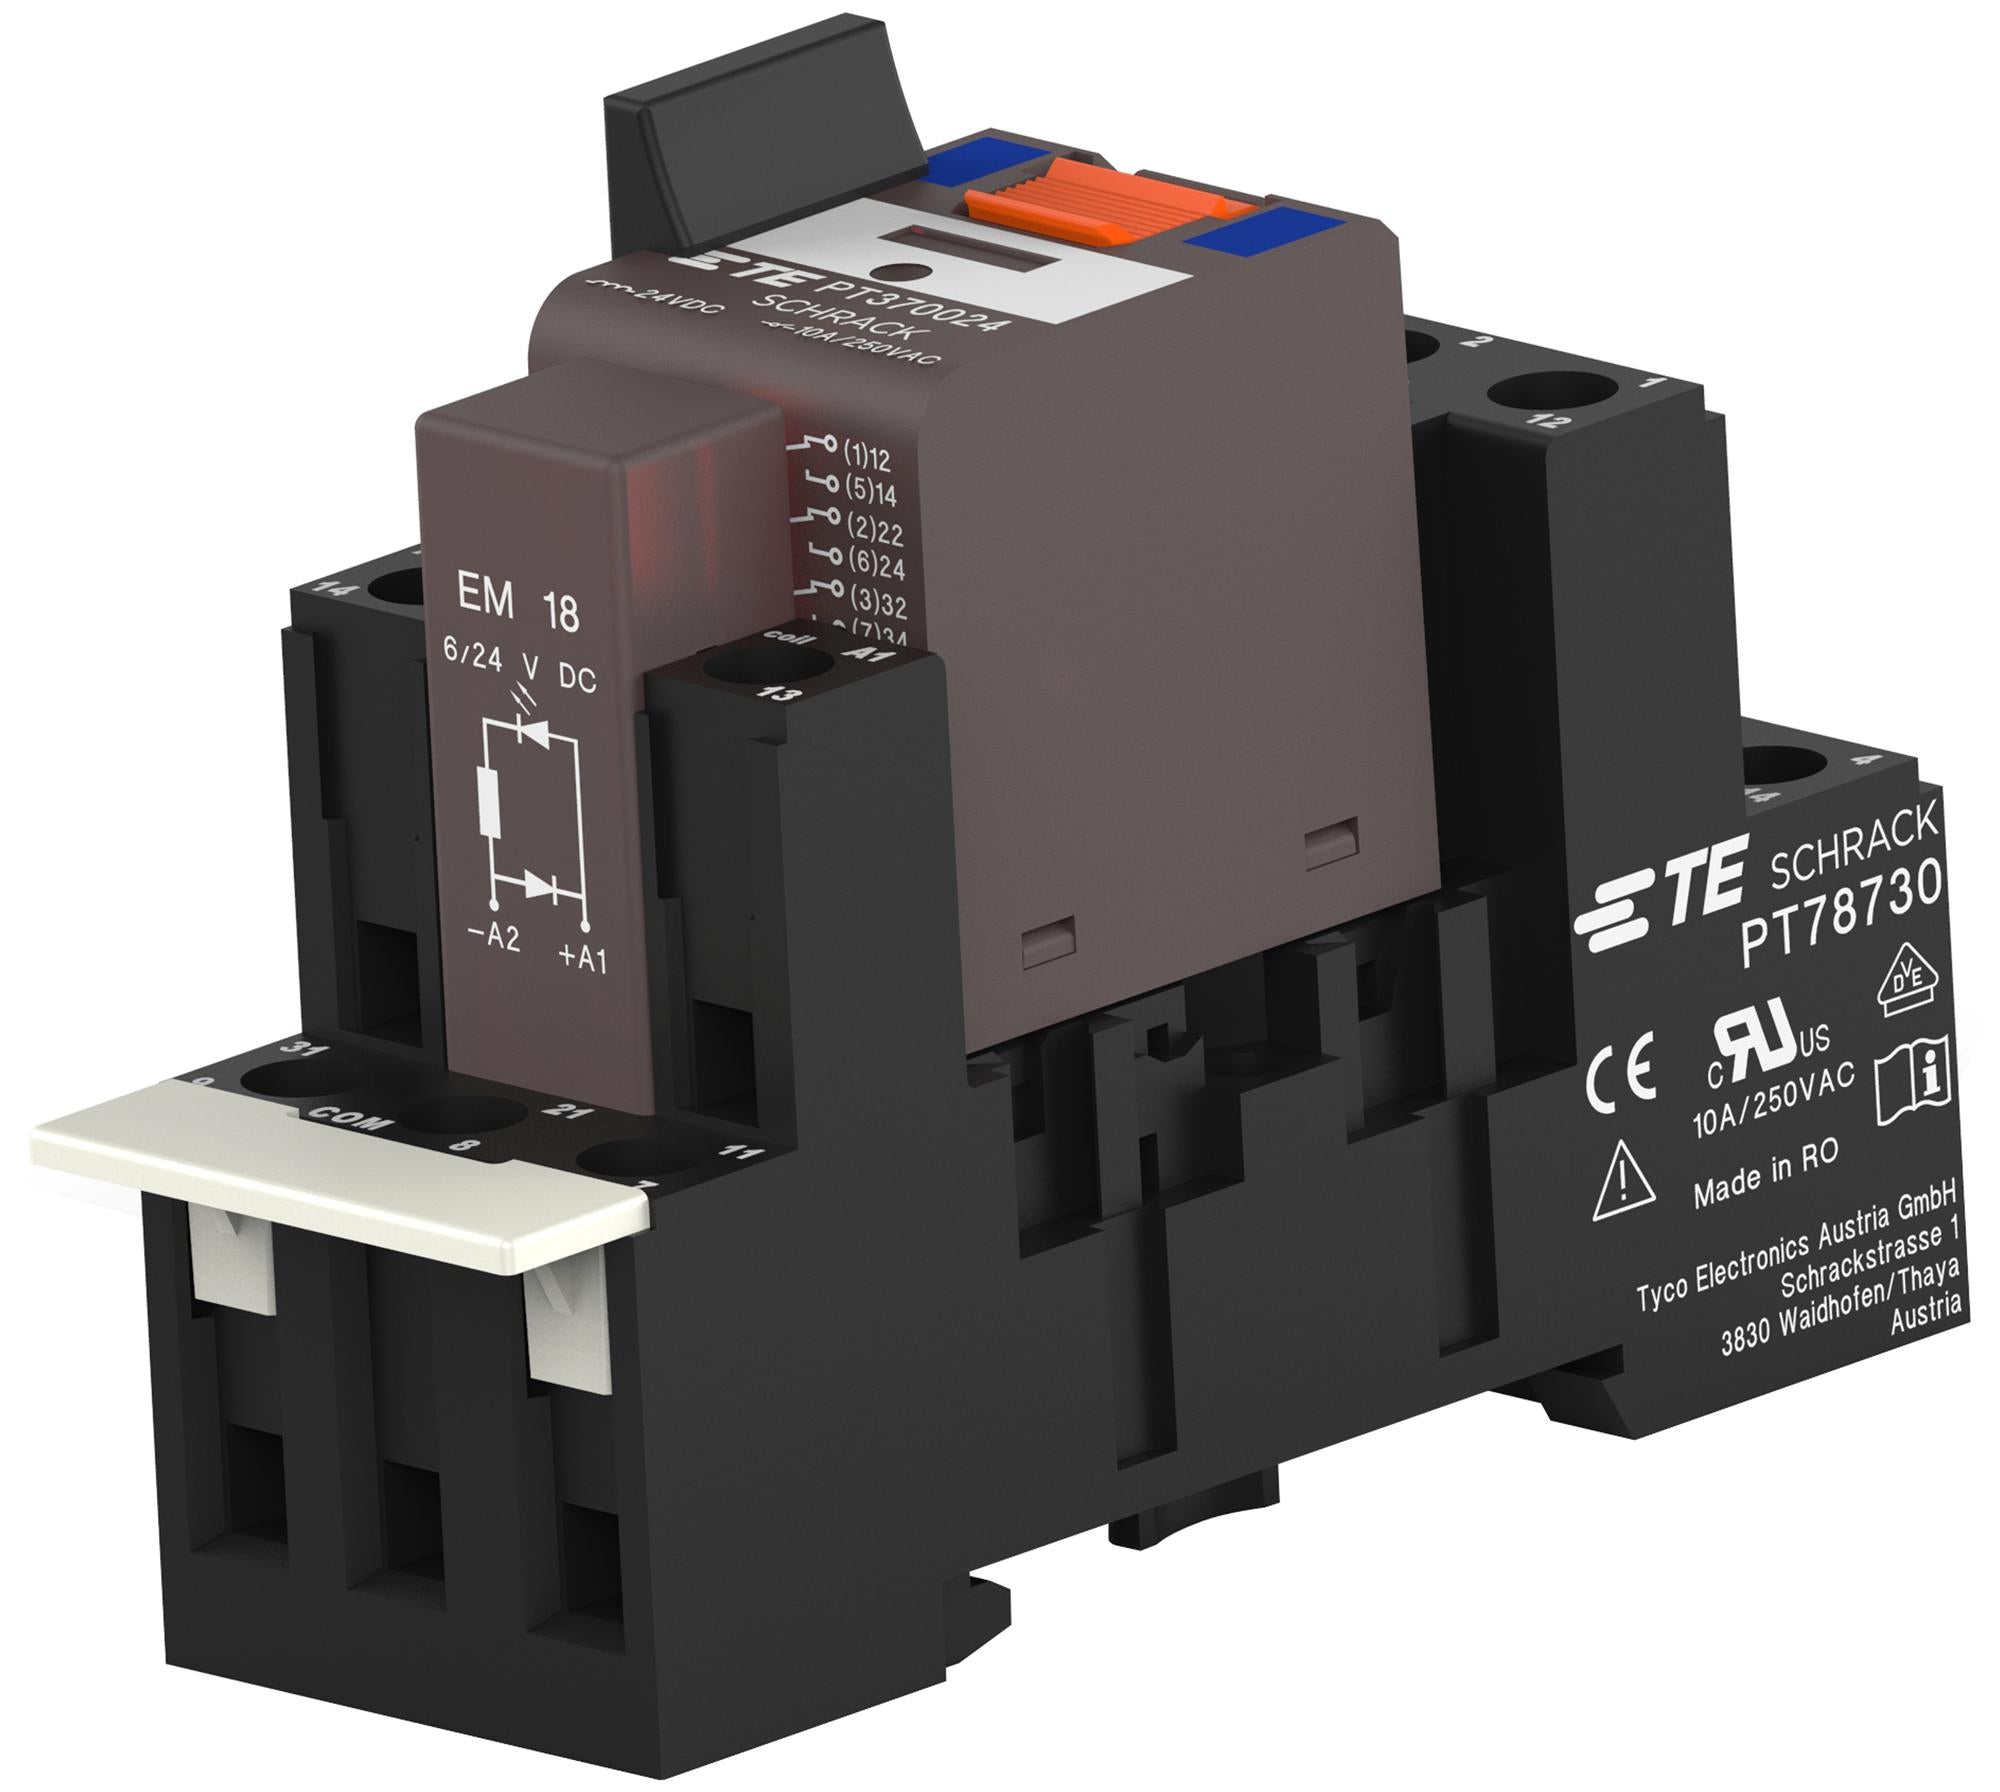 1-1415075-1 POWER RELAY, 3PDT, 10A, 240V, PANEL SCHRACK - TE CONNECTIVITY